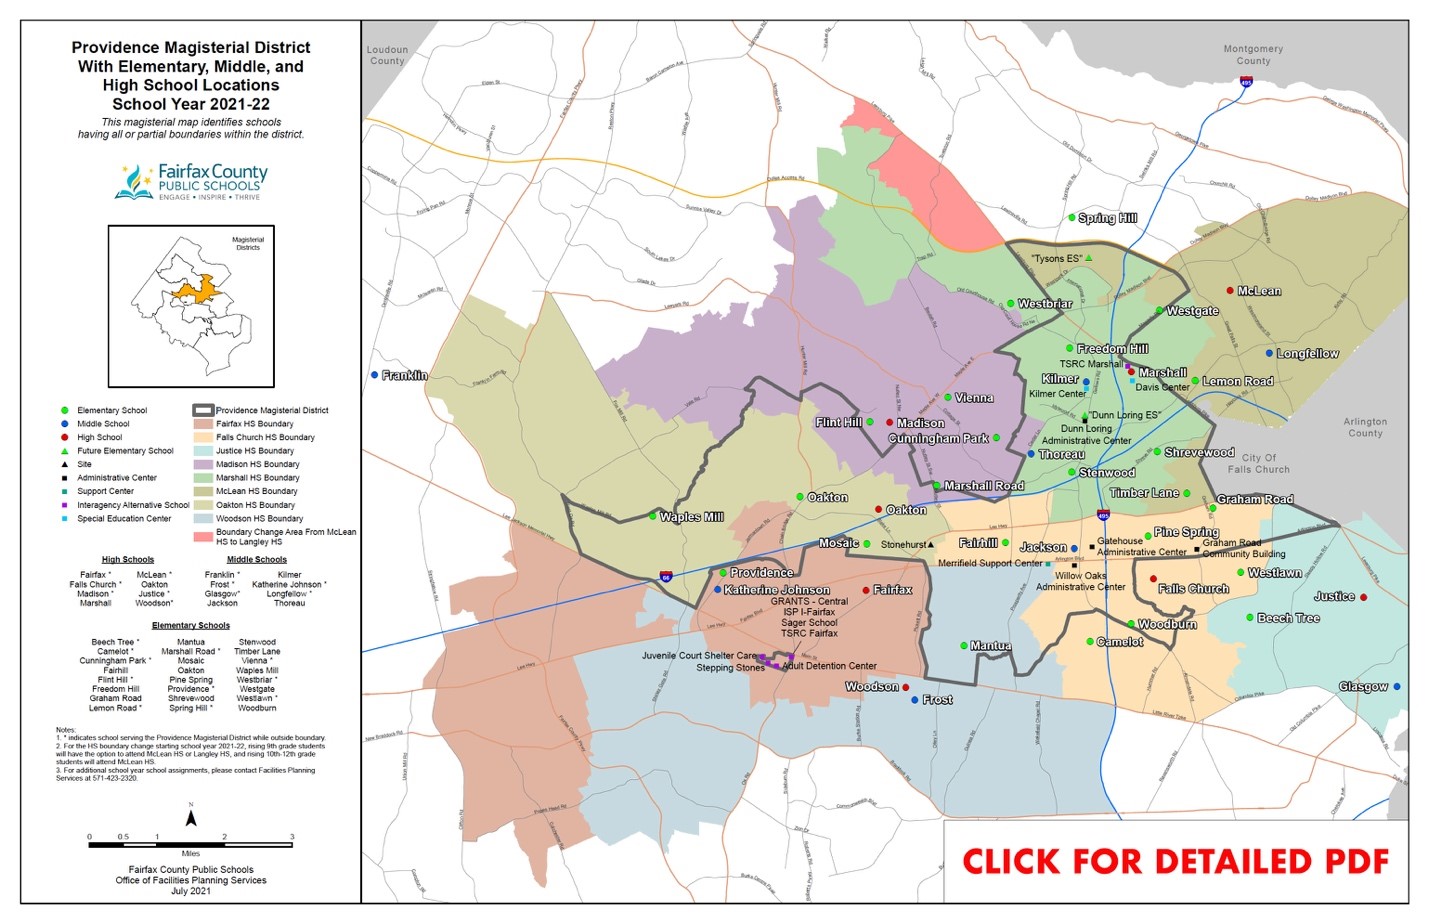 map of Providence magisterial district